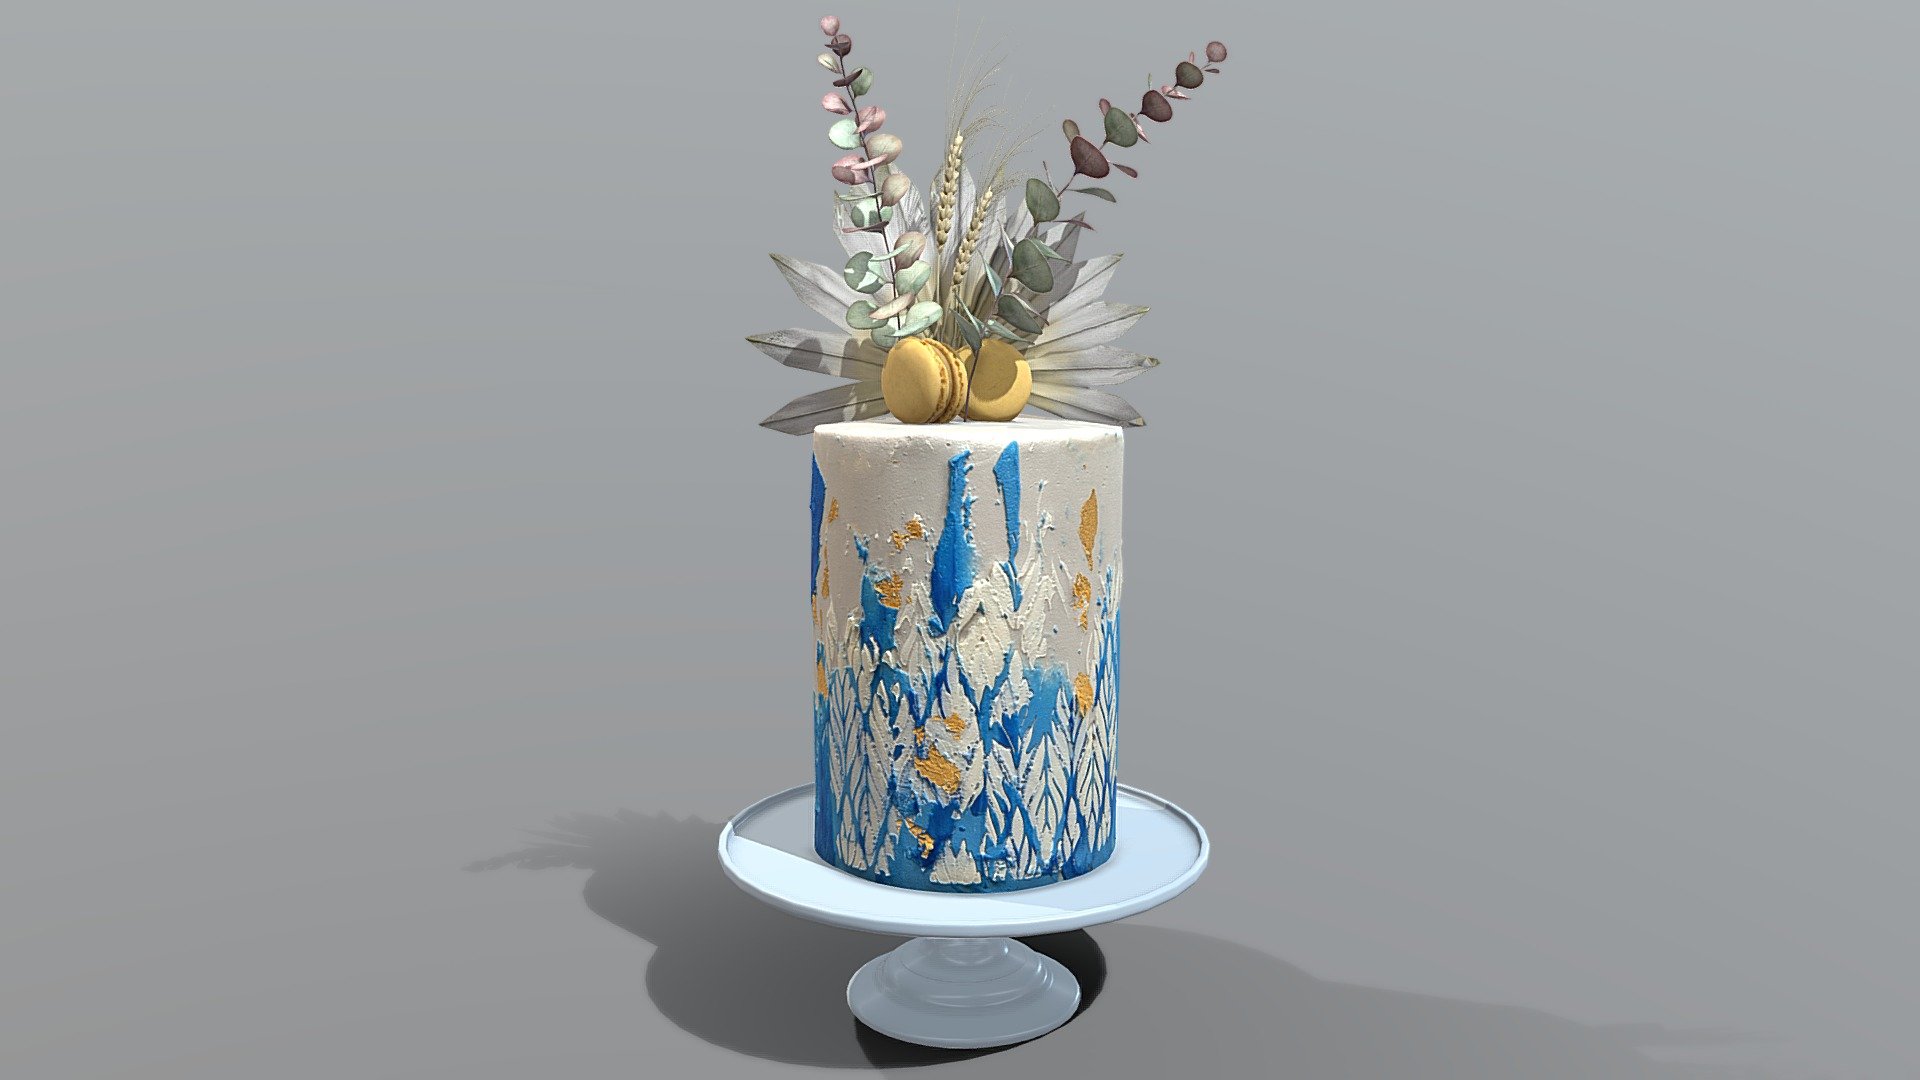 3D scan of a Luxury Aegean Golden Blue Buttercream Cake on the elegant mosser stand which is made by CAKESBURG Online Premium Cake Shop in UK.

This 3D cake can be personalised with any text and colour you want. Please contact us.

You can also order real cake from this link: https://cakesburg.co.uk/products/luxury-buttercream-cake-07?_pos=1&amp;_sid=34087e537&amp;_ss=r

Cake Textures - 4096*4096px PBR photoscan-based materials (Base Color, Normal, Roughness, Specular, AO)

Macarone textures - 4096*4096px PBR photoscan-based materials (Base Color, Normal, Roughness, Specular, AO)

Palm, Eucalyptus and Wheat Textures - 4096*4096px PBR photoscan-based materials (Base Color, Normal, Roughness, Specular, AO) - Luxury Aegean Golden Blue - Buy Royalty Free 3D model by Cakesburg Premium 3D Cake Shop (@Viscom_Cakesburg) 3d model